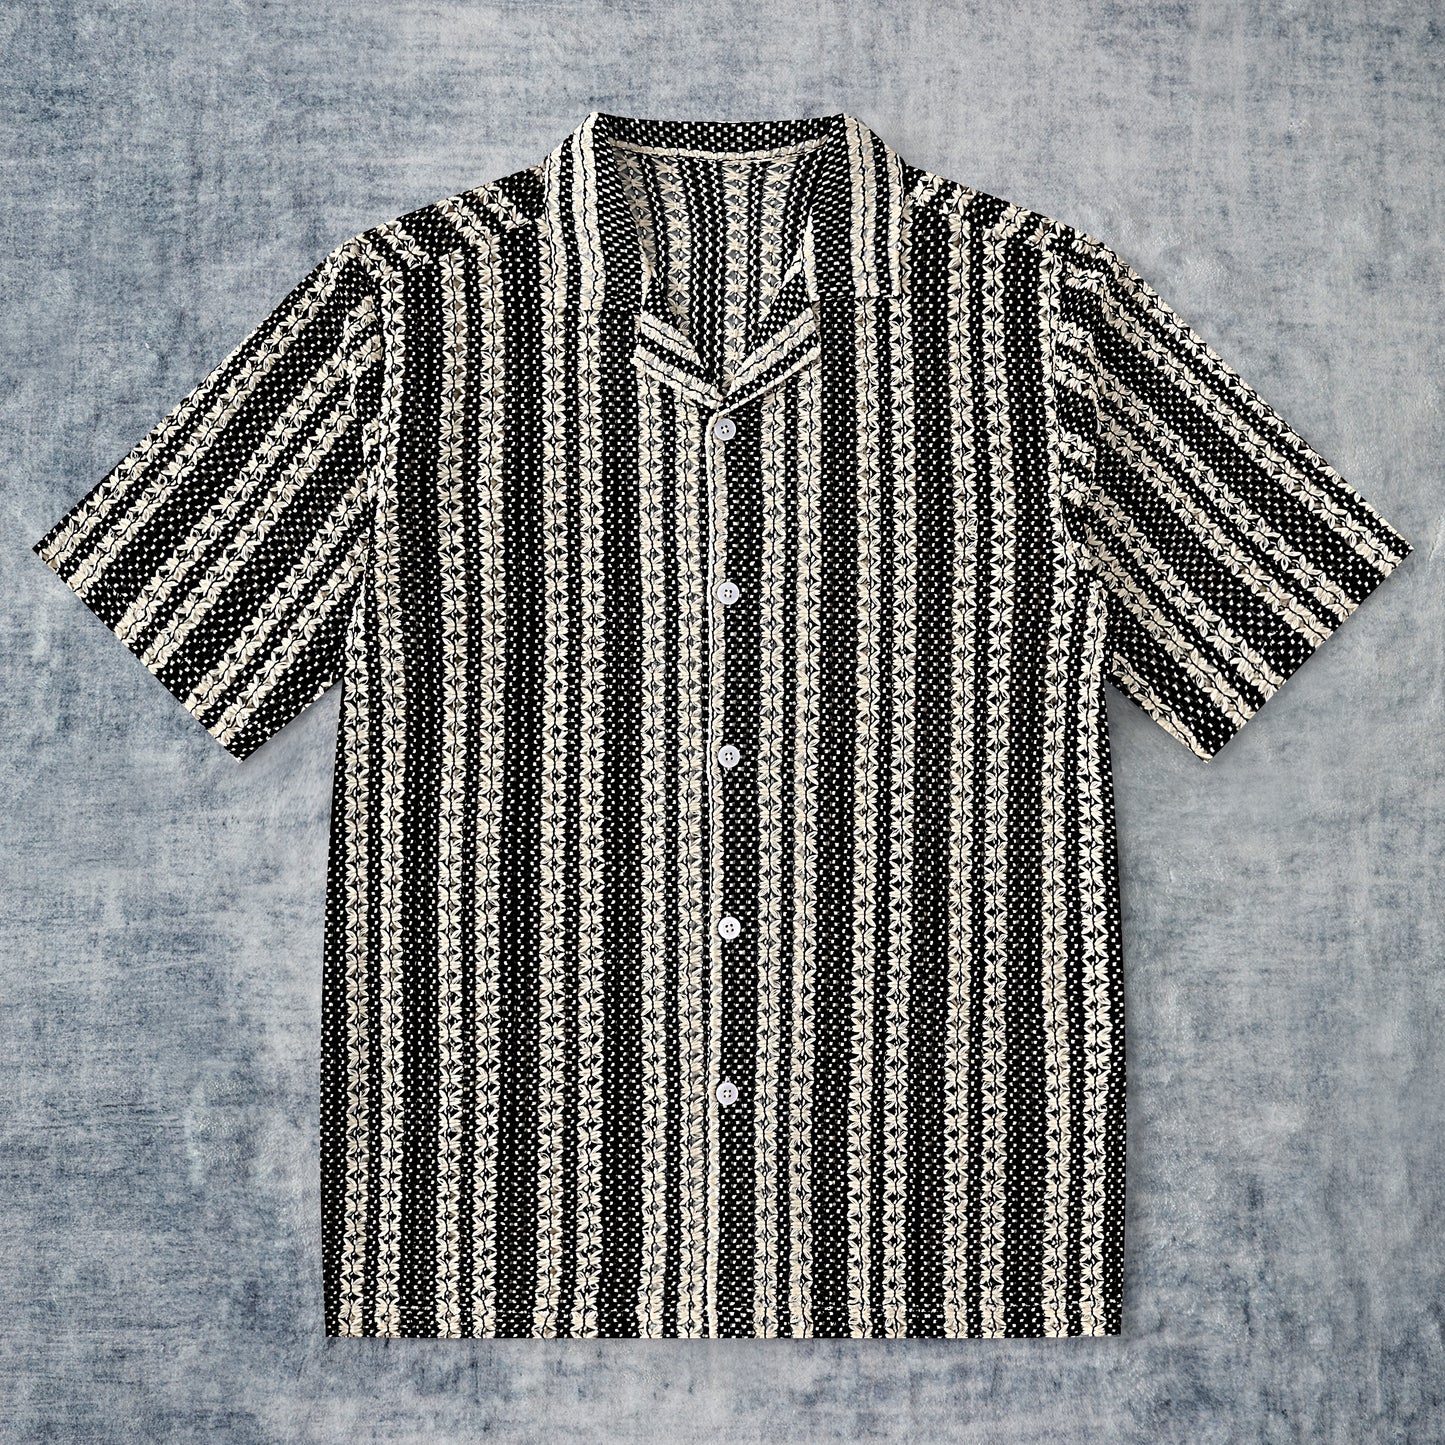 Striped Hand-Crafted Floral Textured Shirt